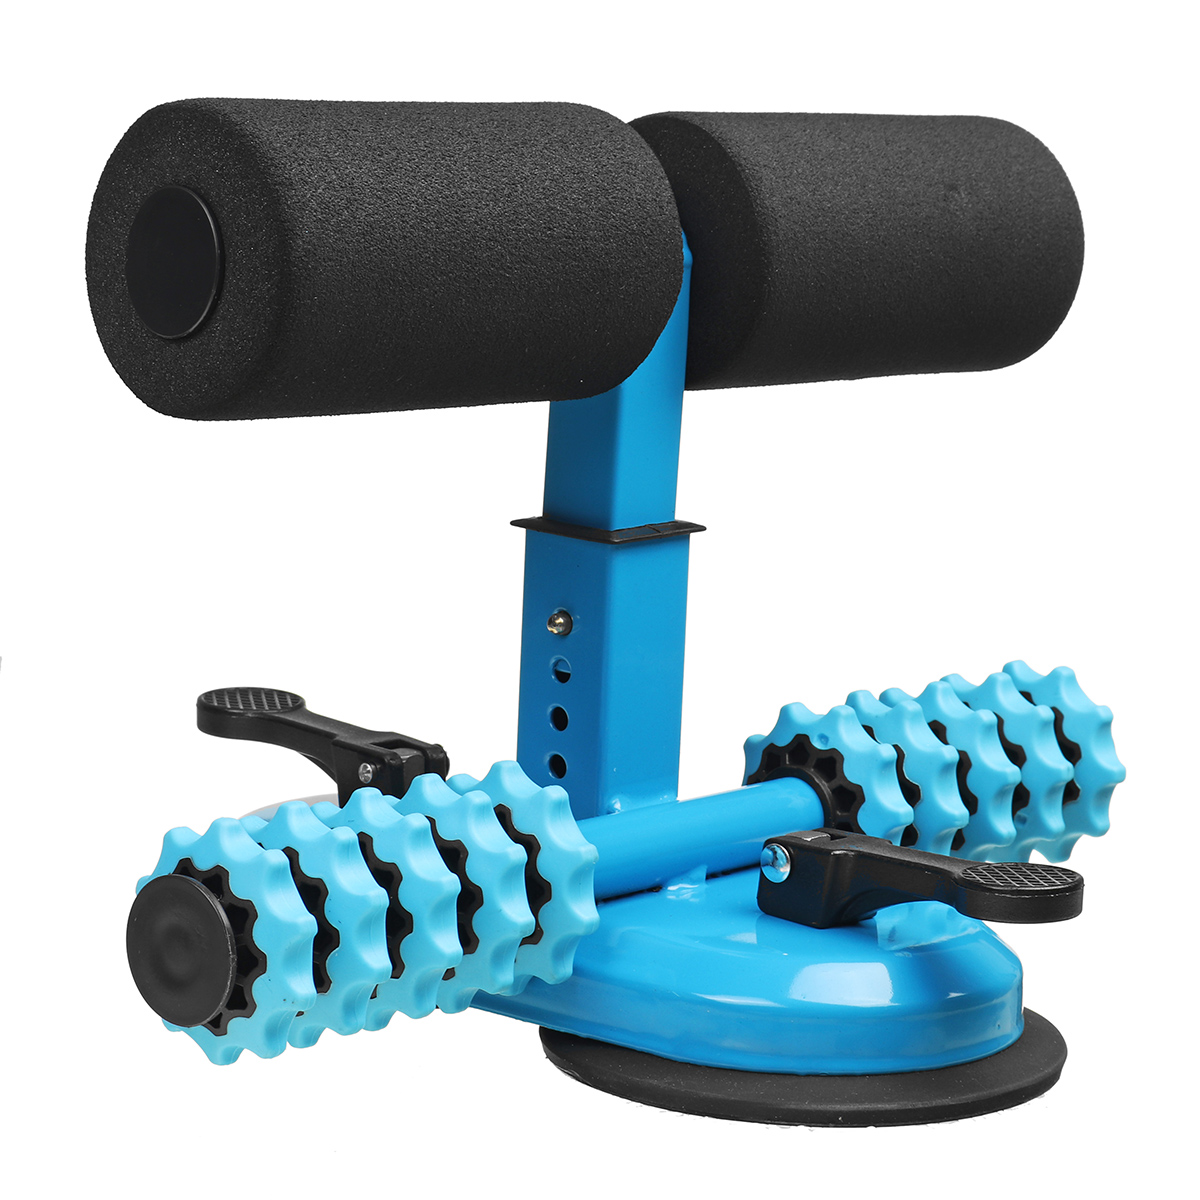 Adjustable-Massage-Sit-Up-Bars-Abdominal-Core-Workout-Strength-Training-Sit-up-Assist-Equipment-Home-1687457-3